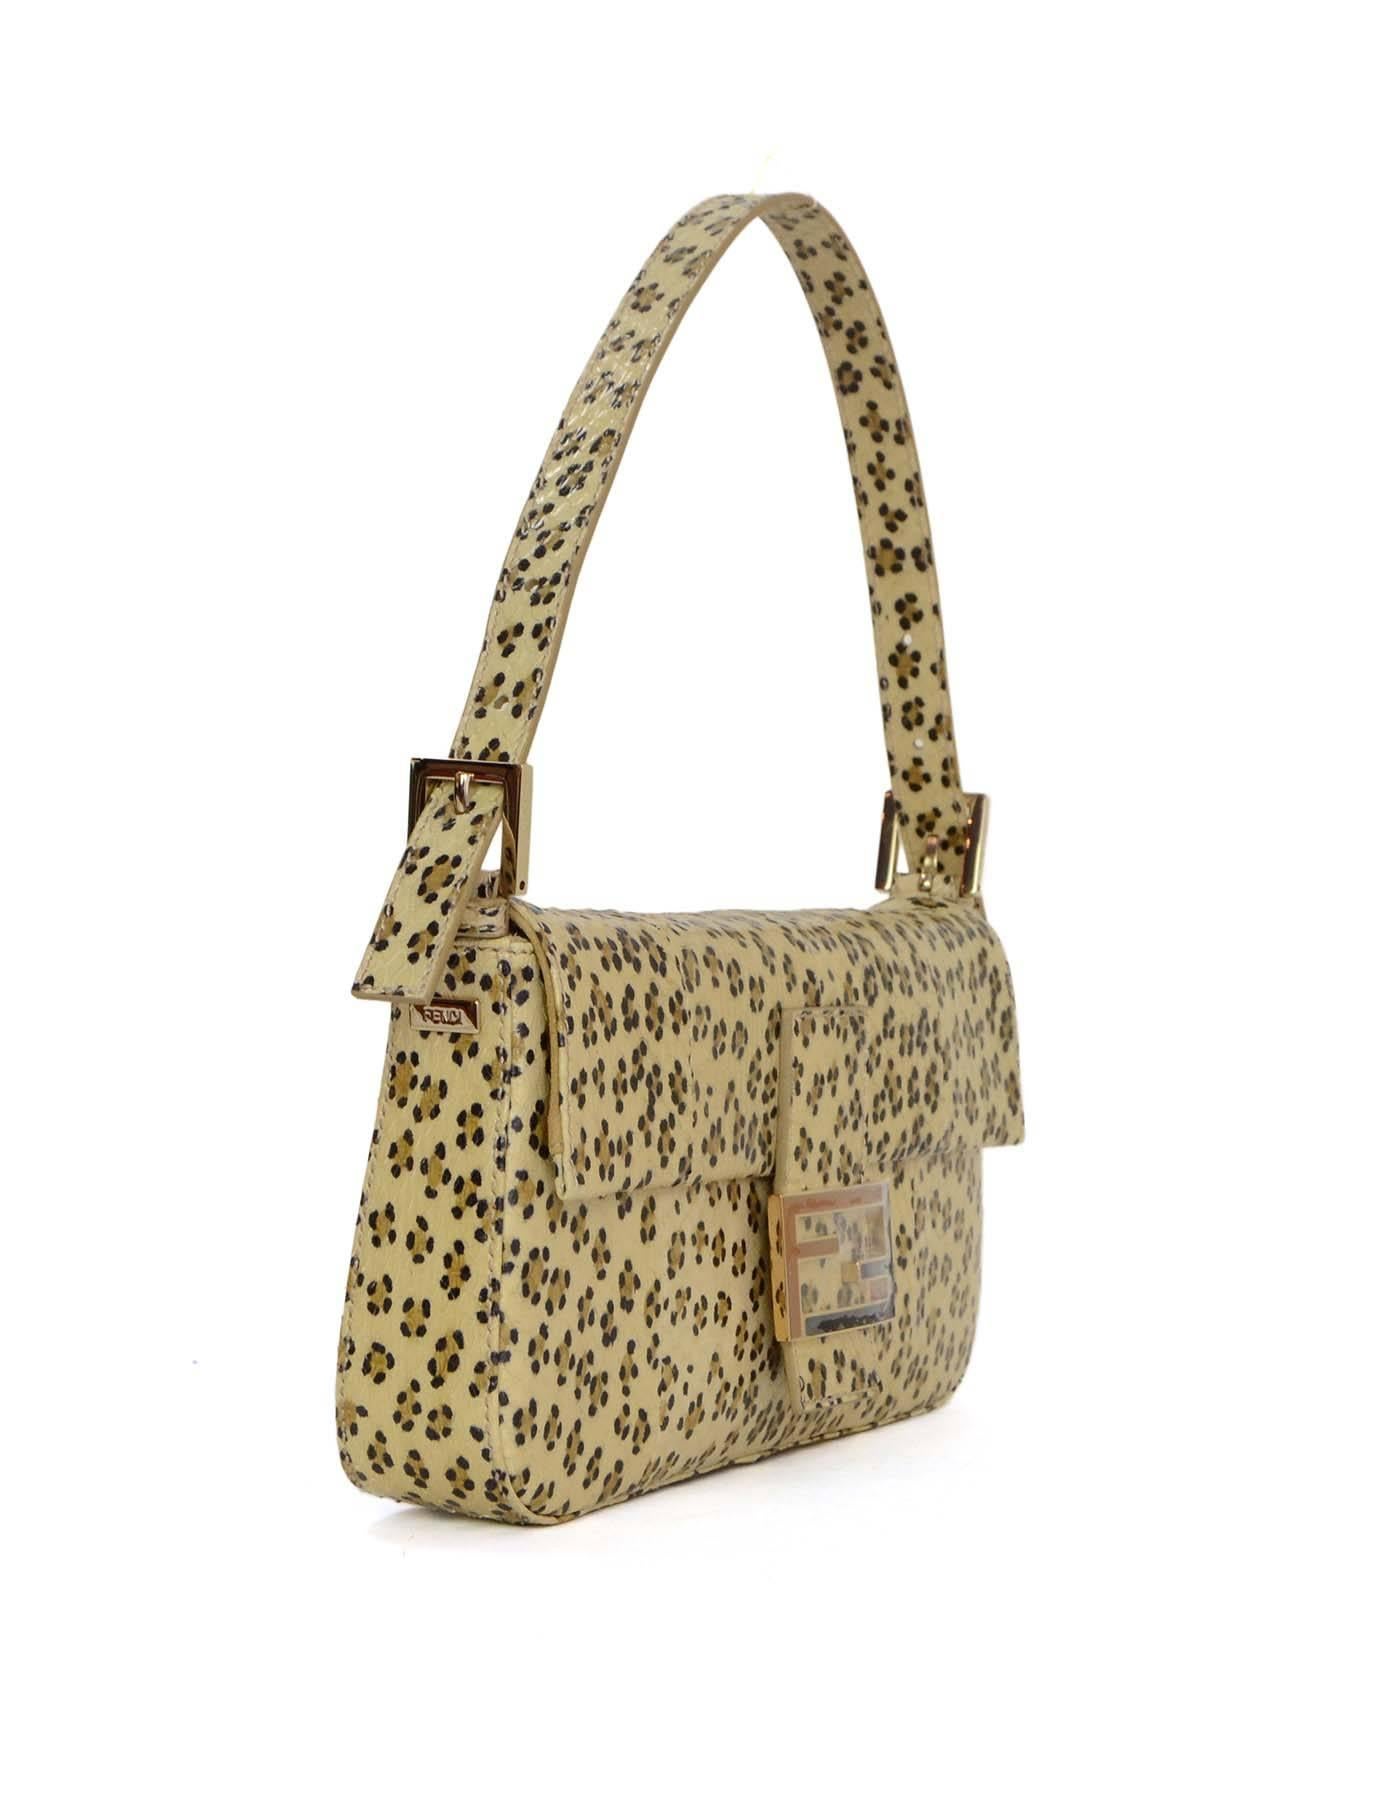 Fendi Beige Leopard Printed Python Baguette
Features leopard print throughout python exterior as well as detachable shoulder strap to wear as clutch
Made in: Italy
Color: Beige, tan and black
Hardware: Goldtone
Materials: Python
Lining: Nude